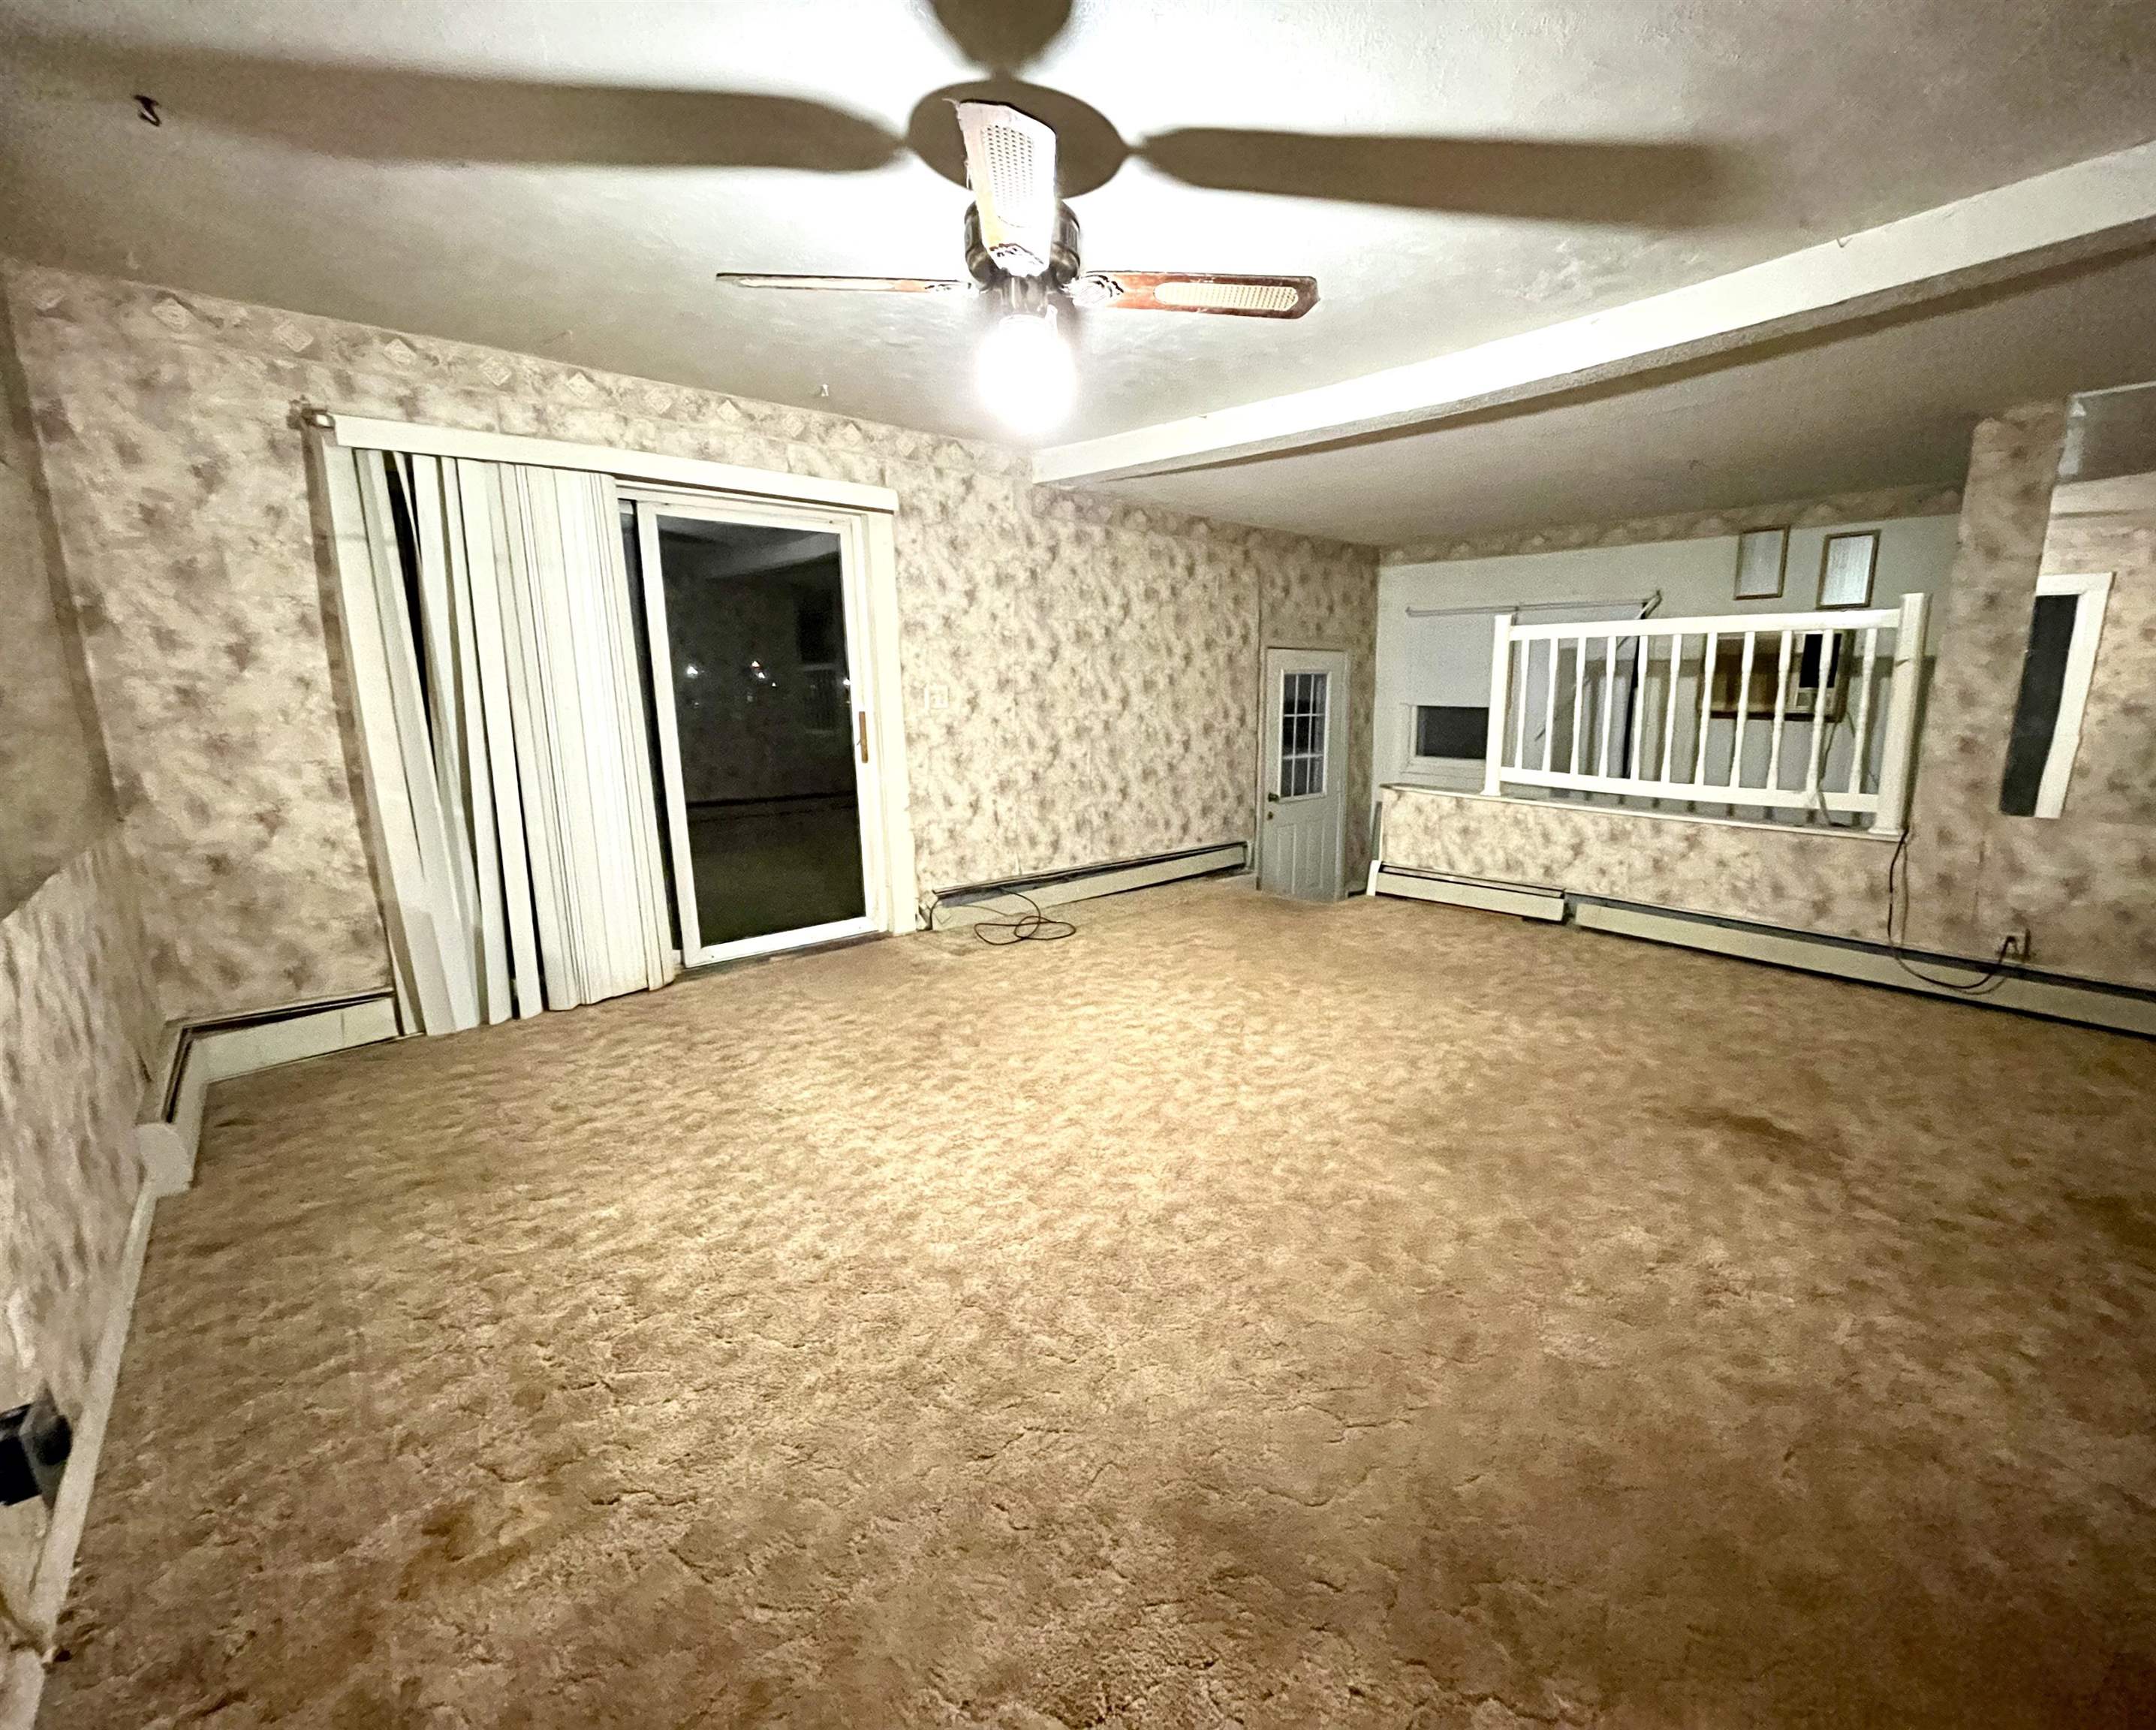 Living Room with basement stairway